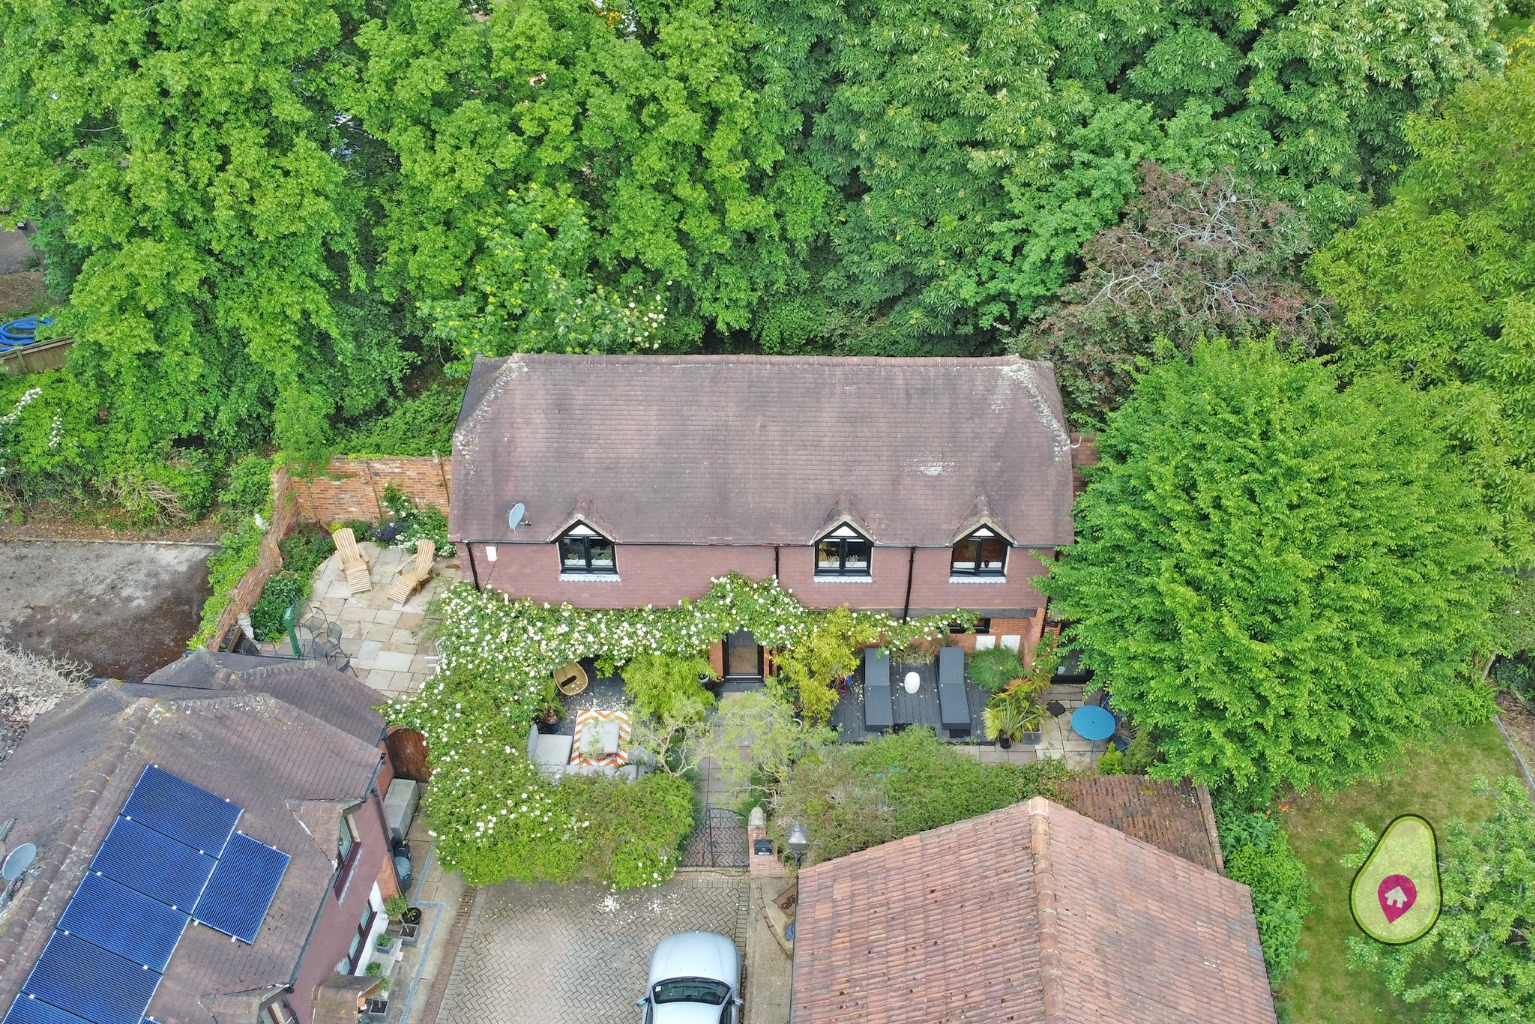 This is a special home, set in the picturesque village of Sonning, Old Well Court is a private development of just three properties. This house is absolutely stunning inside with the benefit of a private garden area, double garage and two parking spaces.